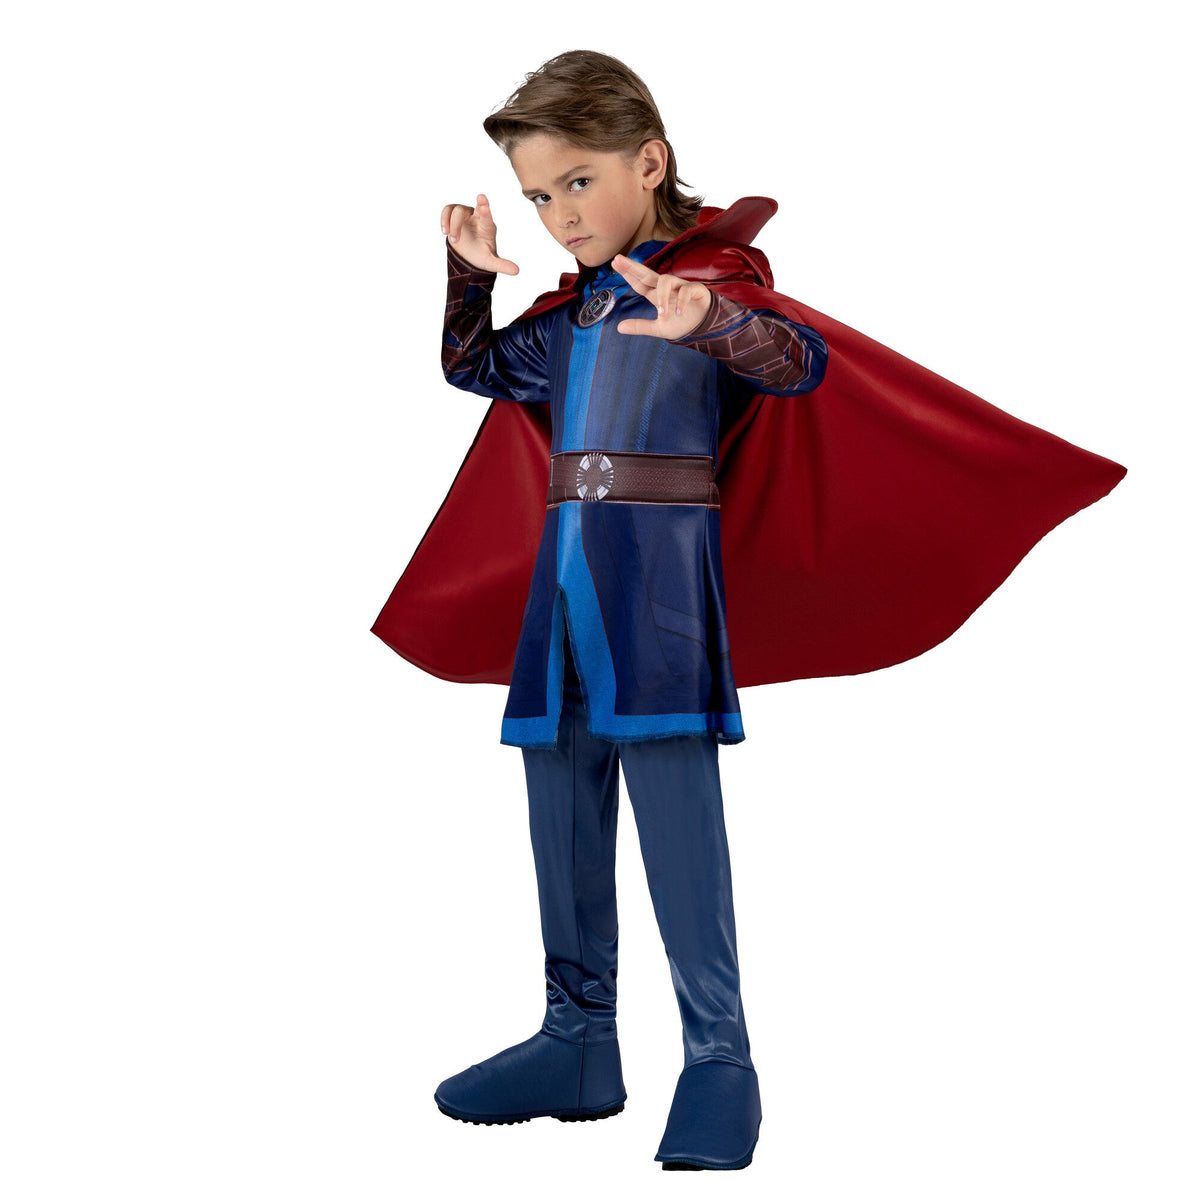 KROEGER Costumes Marvel Dr.Strange Qualux Costume for Kids, Blue Tunic Top with Red Cape